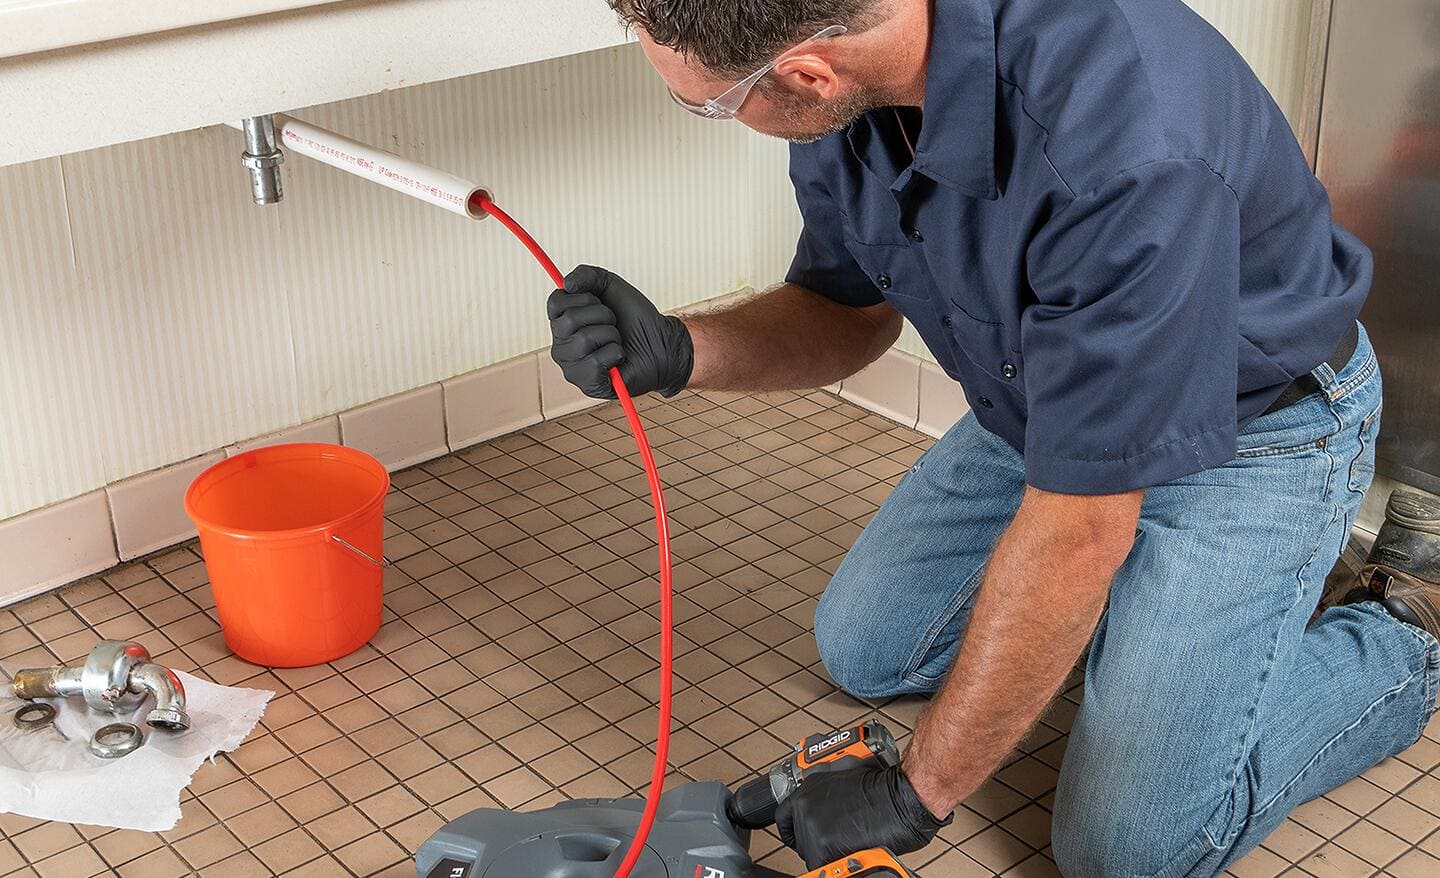 A man uses an inspection camera to check a drain line.